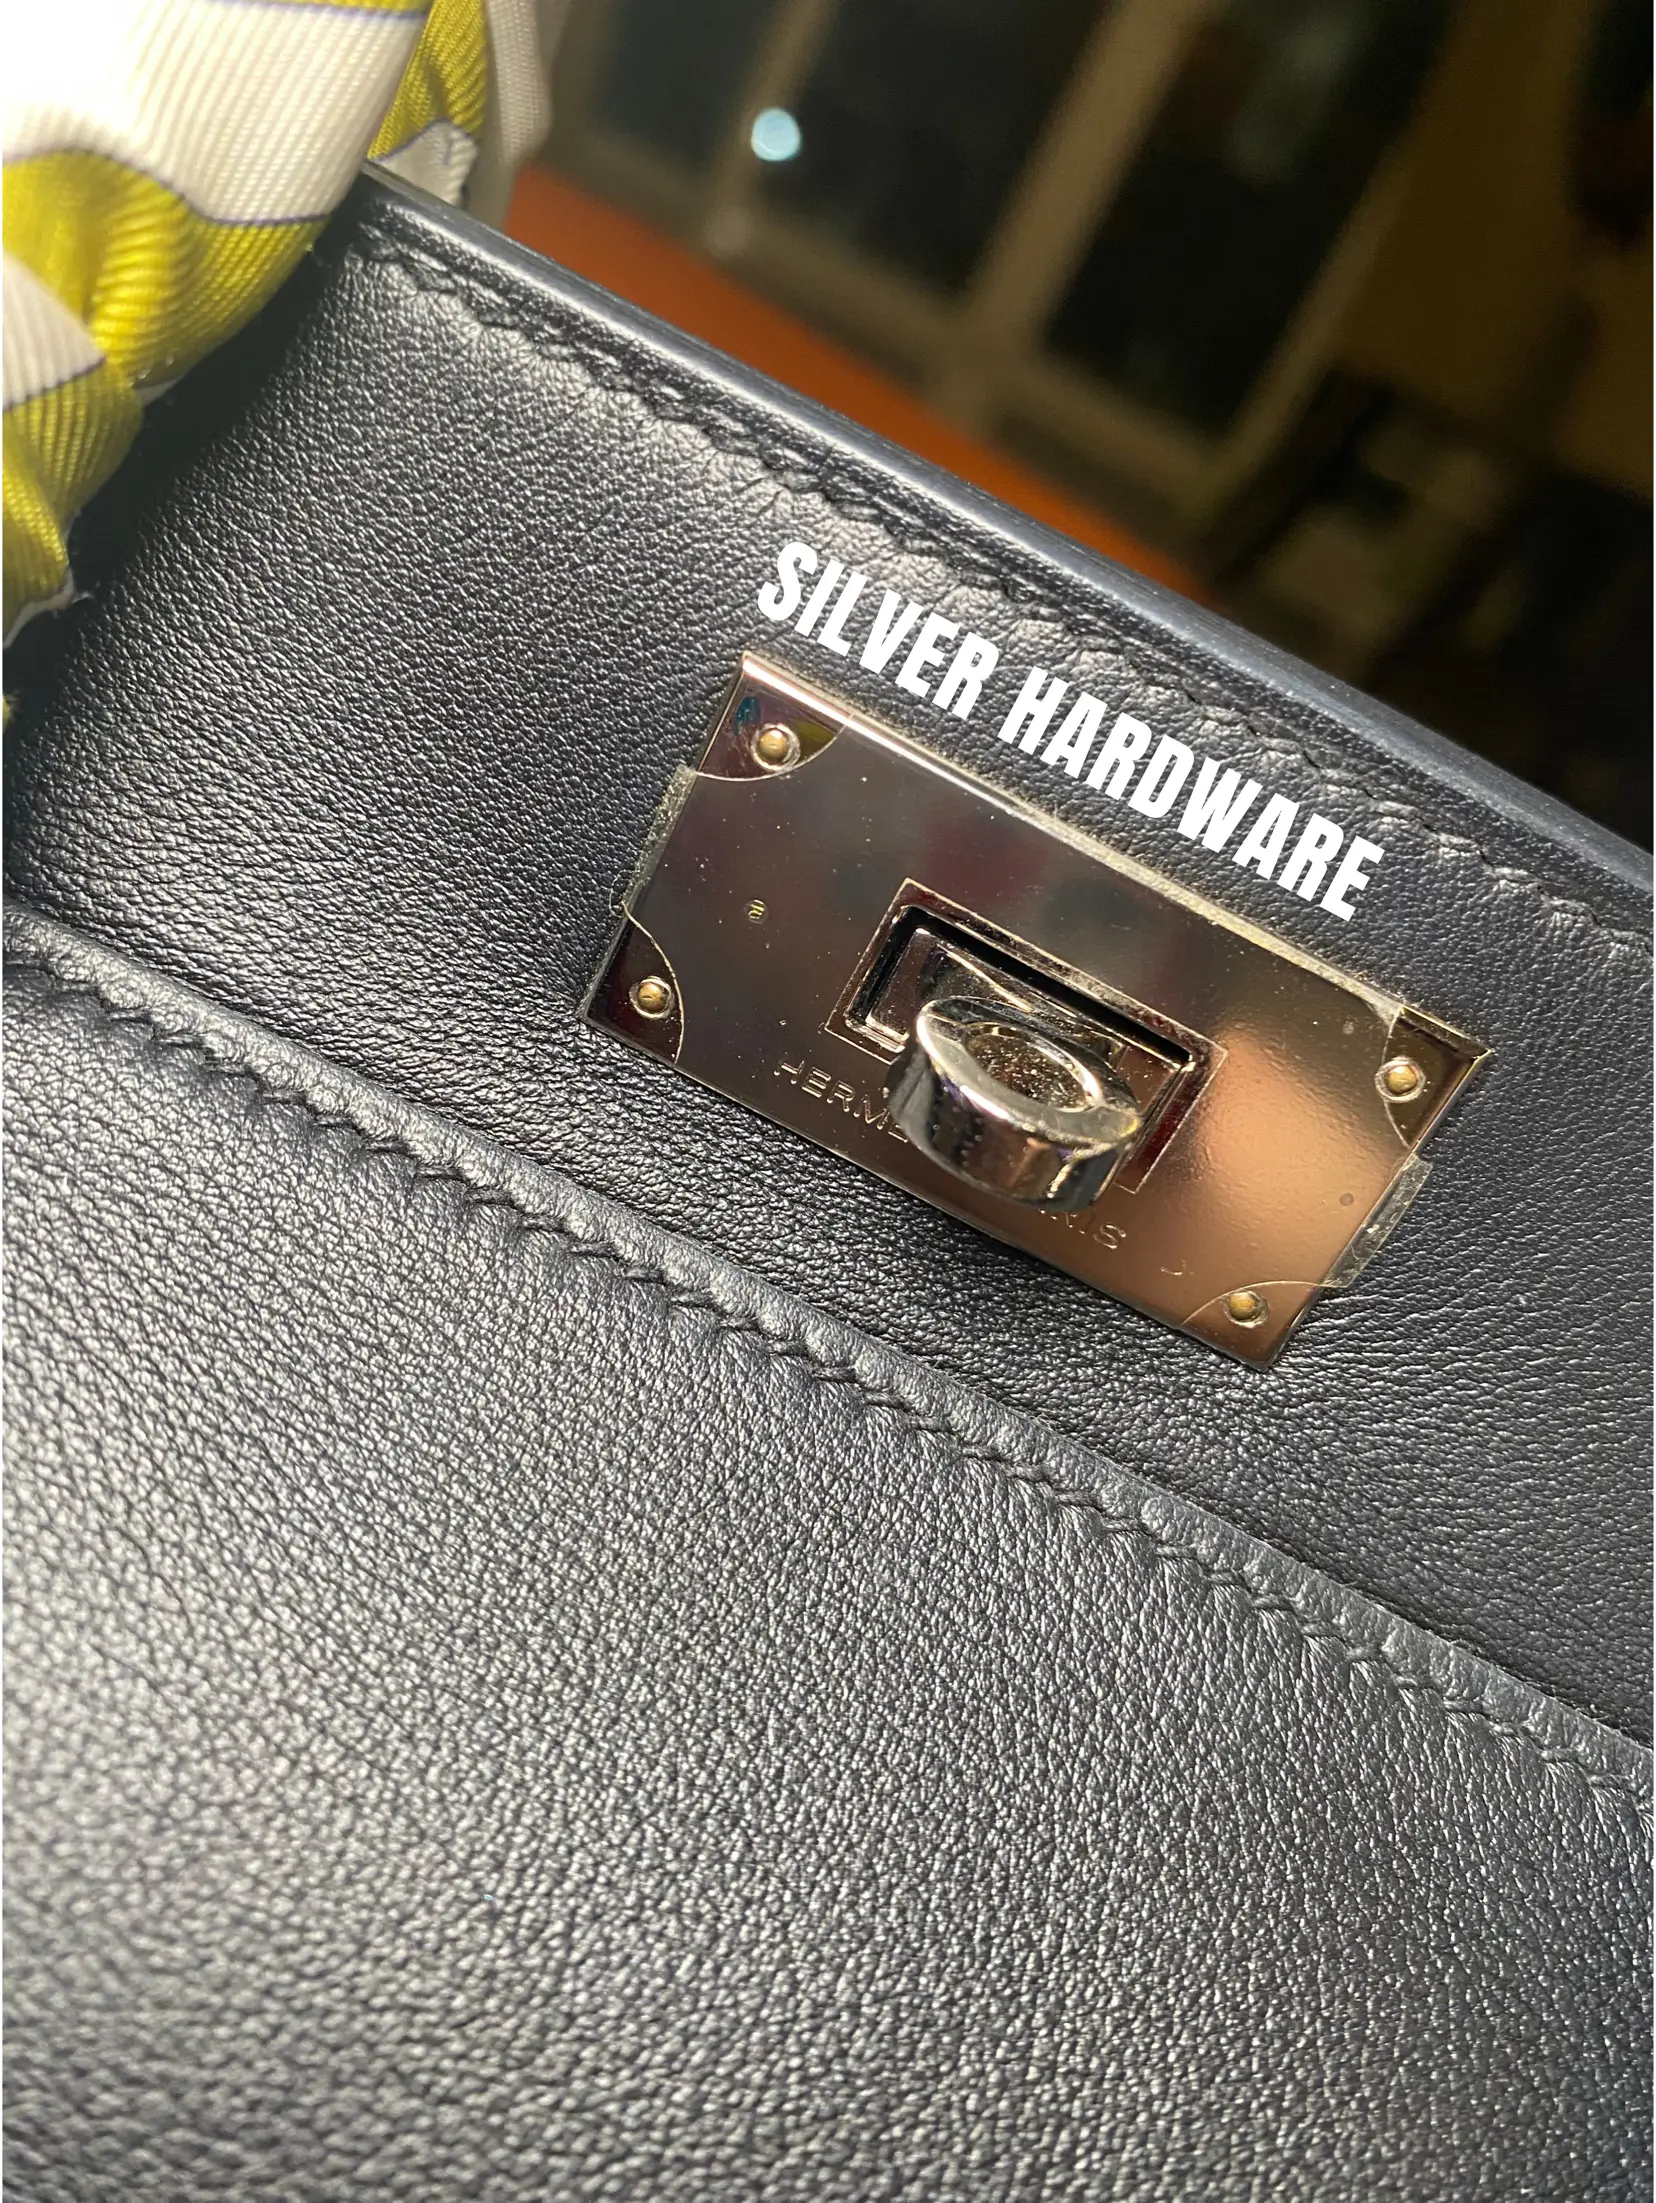 HERMES UNBOXING & REVIEW: Evelyne 29 (Unboxing, How To Style, What It Fits)  